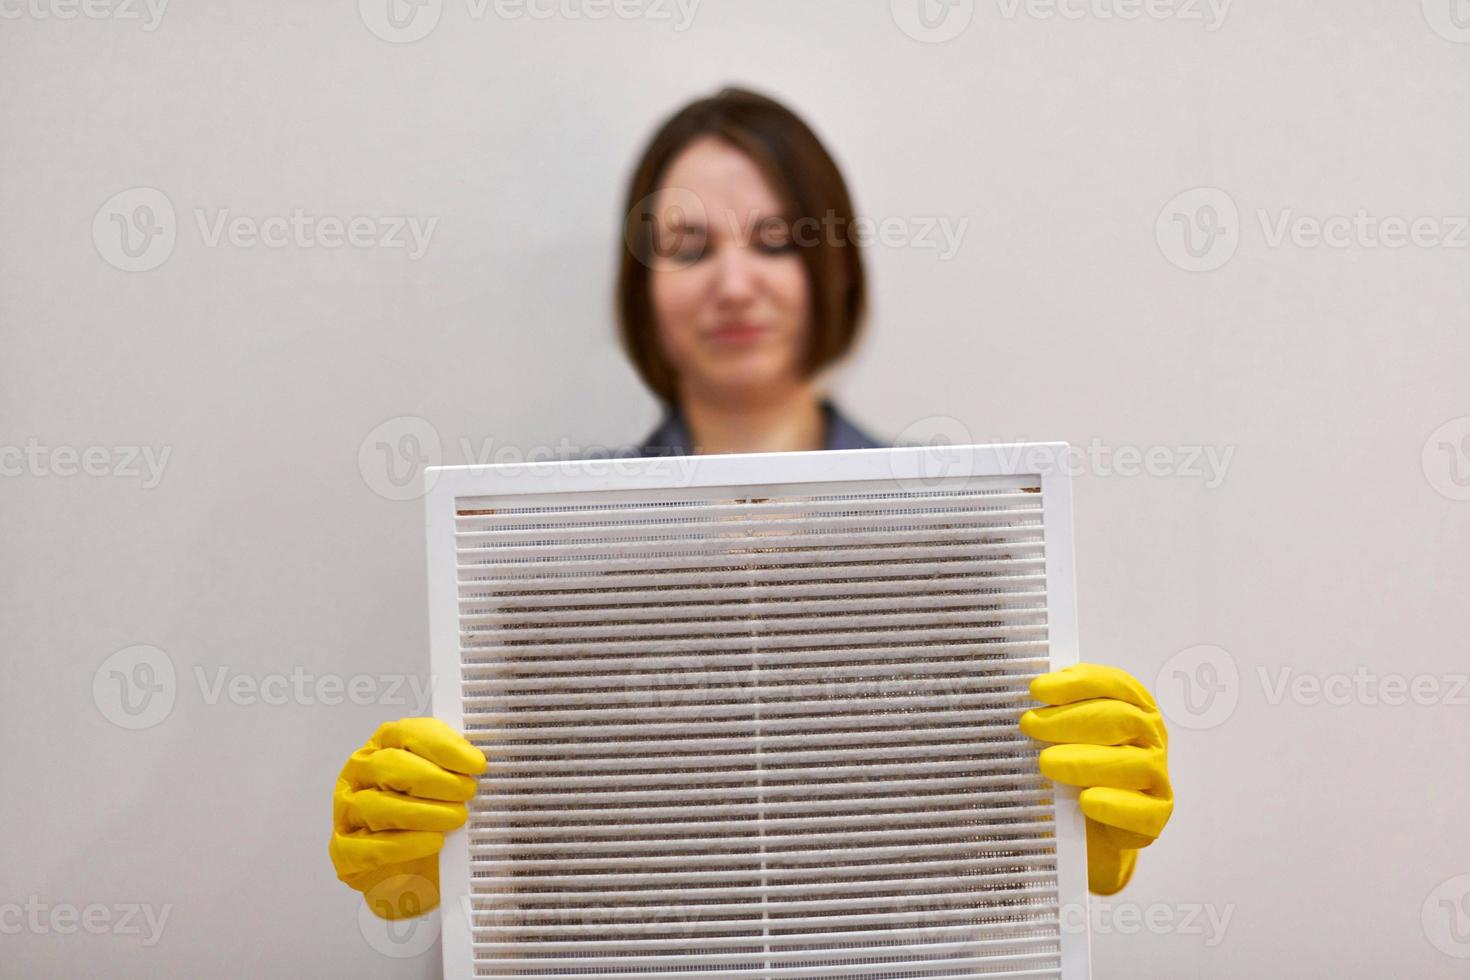 Woman holding dirty and dusty ventilation grille, disgusted photo